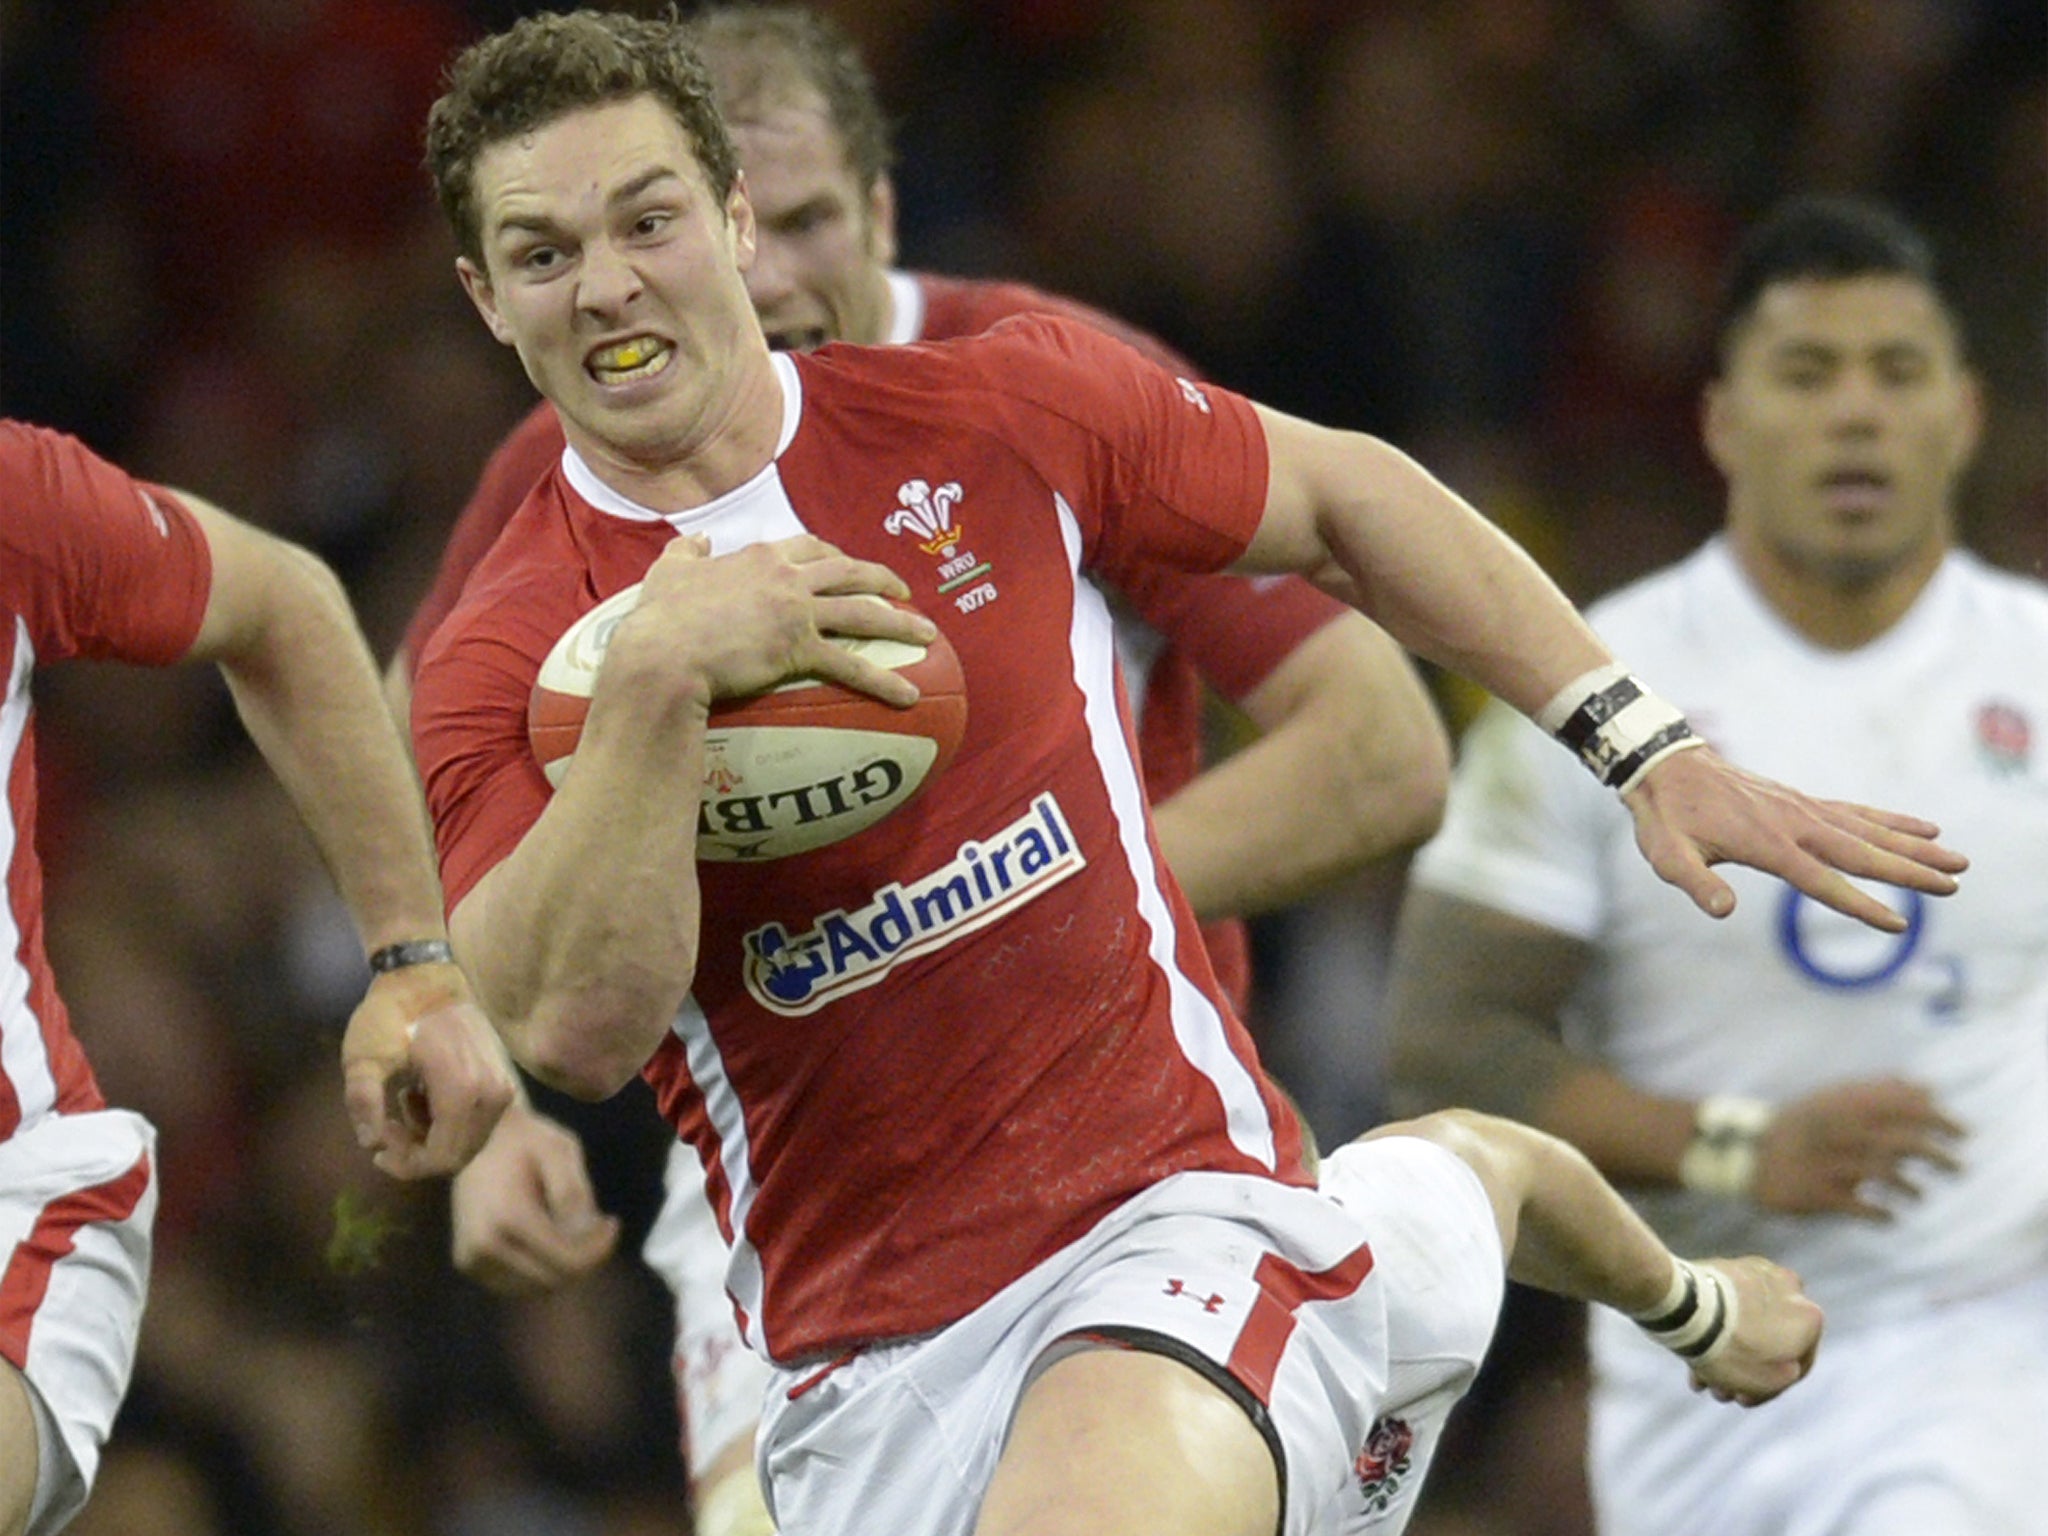 George North is among several Wales players who have left the regional sides